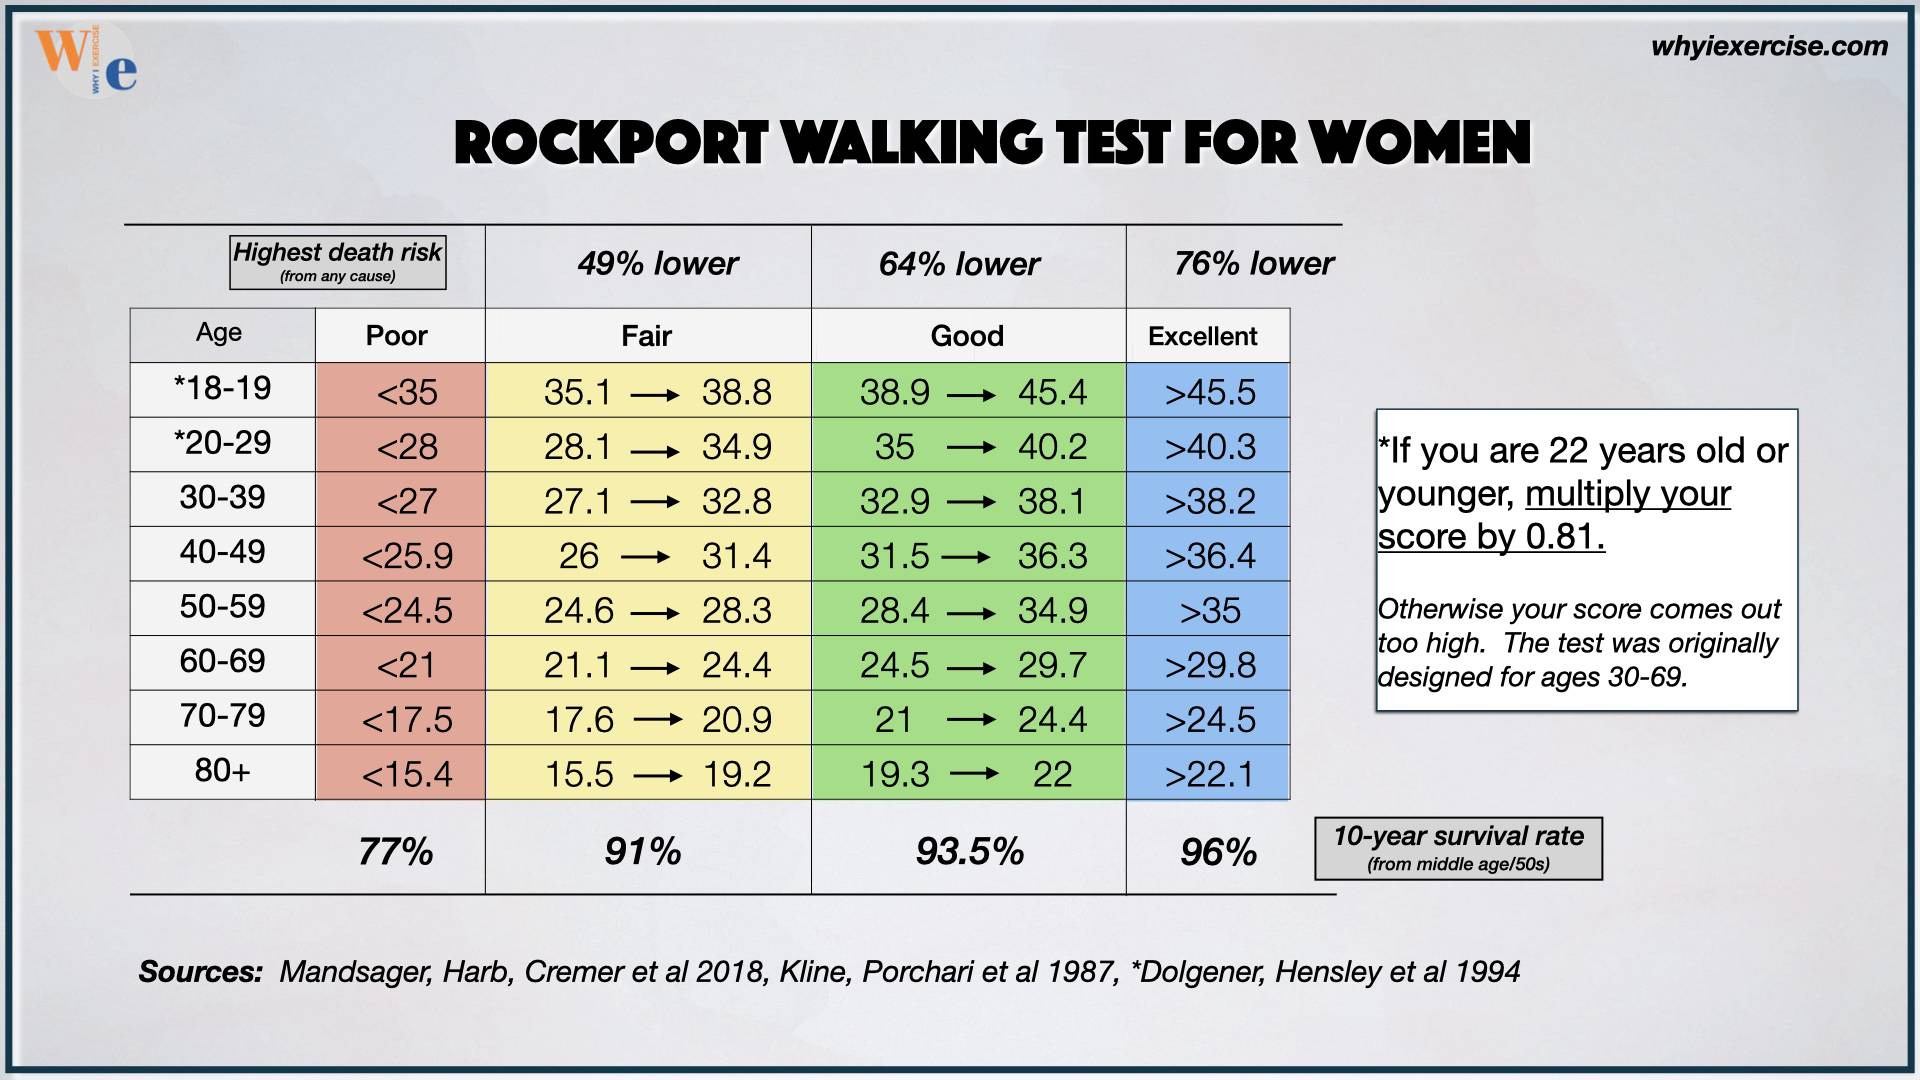 https://www.whyiexercise.com/images/xrockport-walking-test-score-chart-for-women-by-age-group.jpg.pagespeed.ic.YI49ExDnmT.jpg